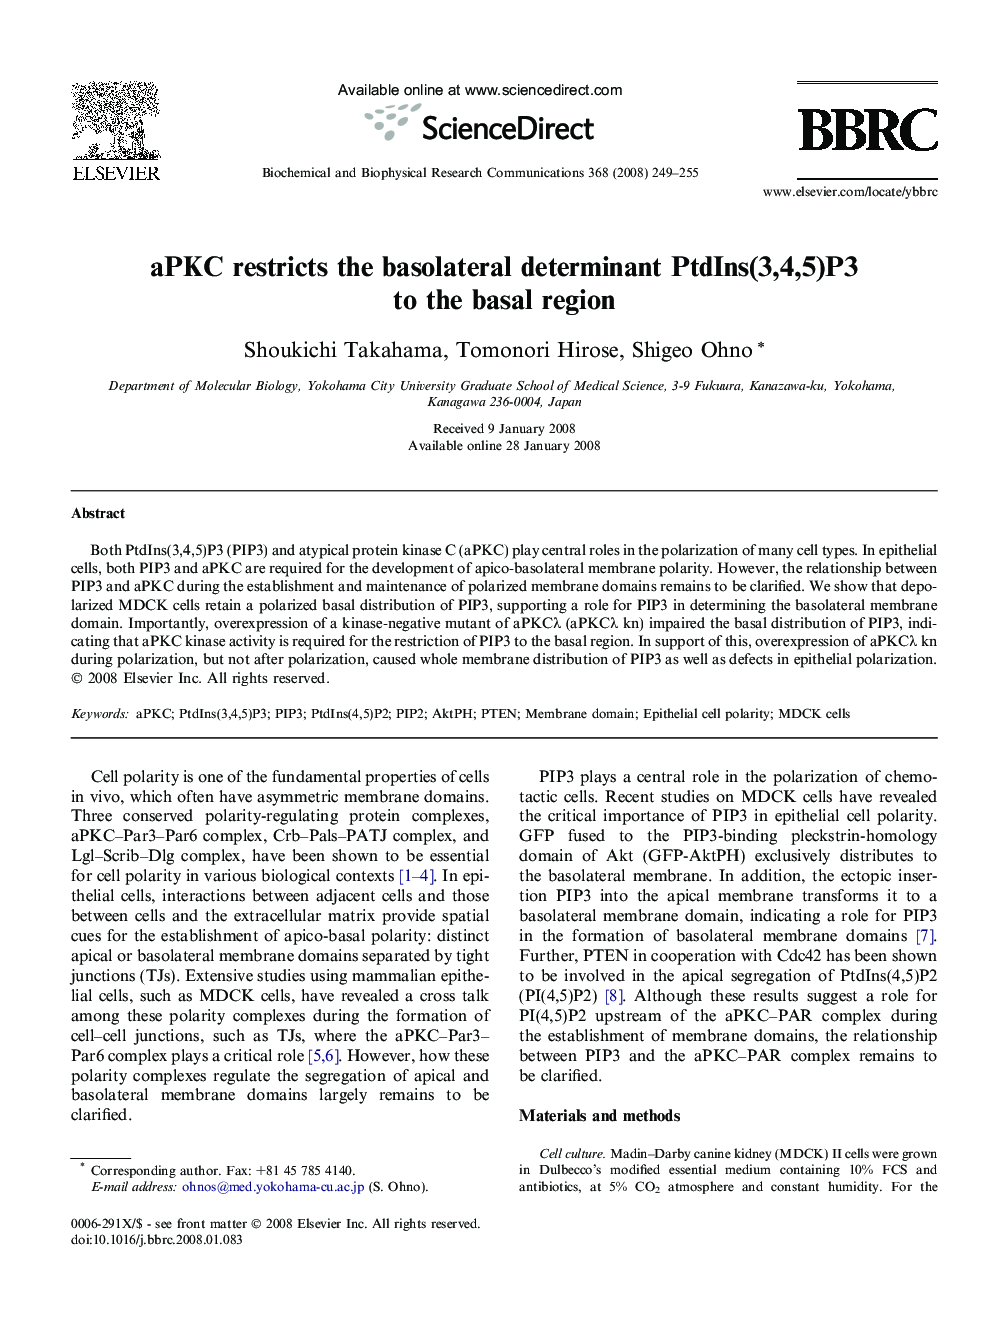 aPKC restricts the basolateral determinant PtdIns(3,4,5)P3 to the basal region